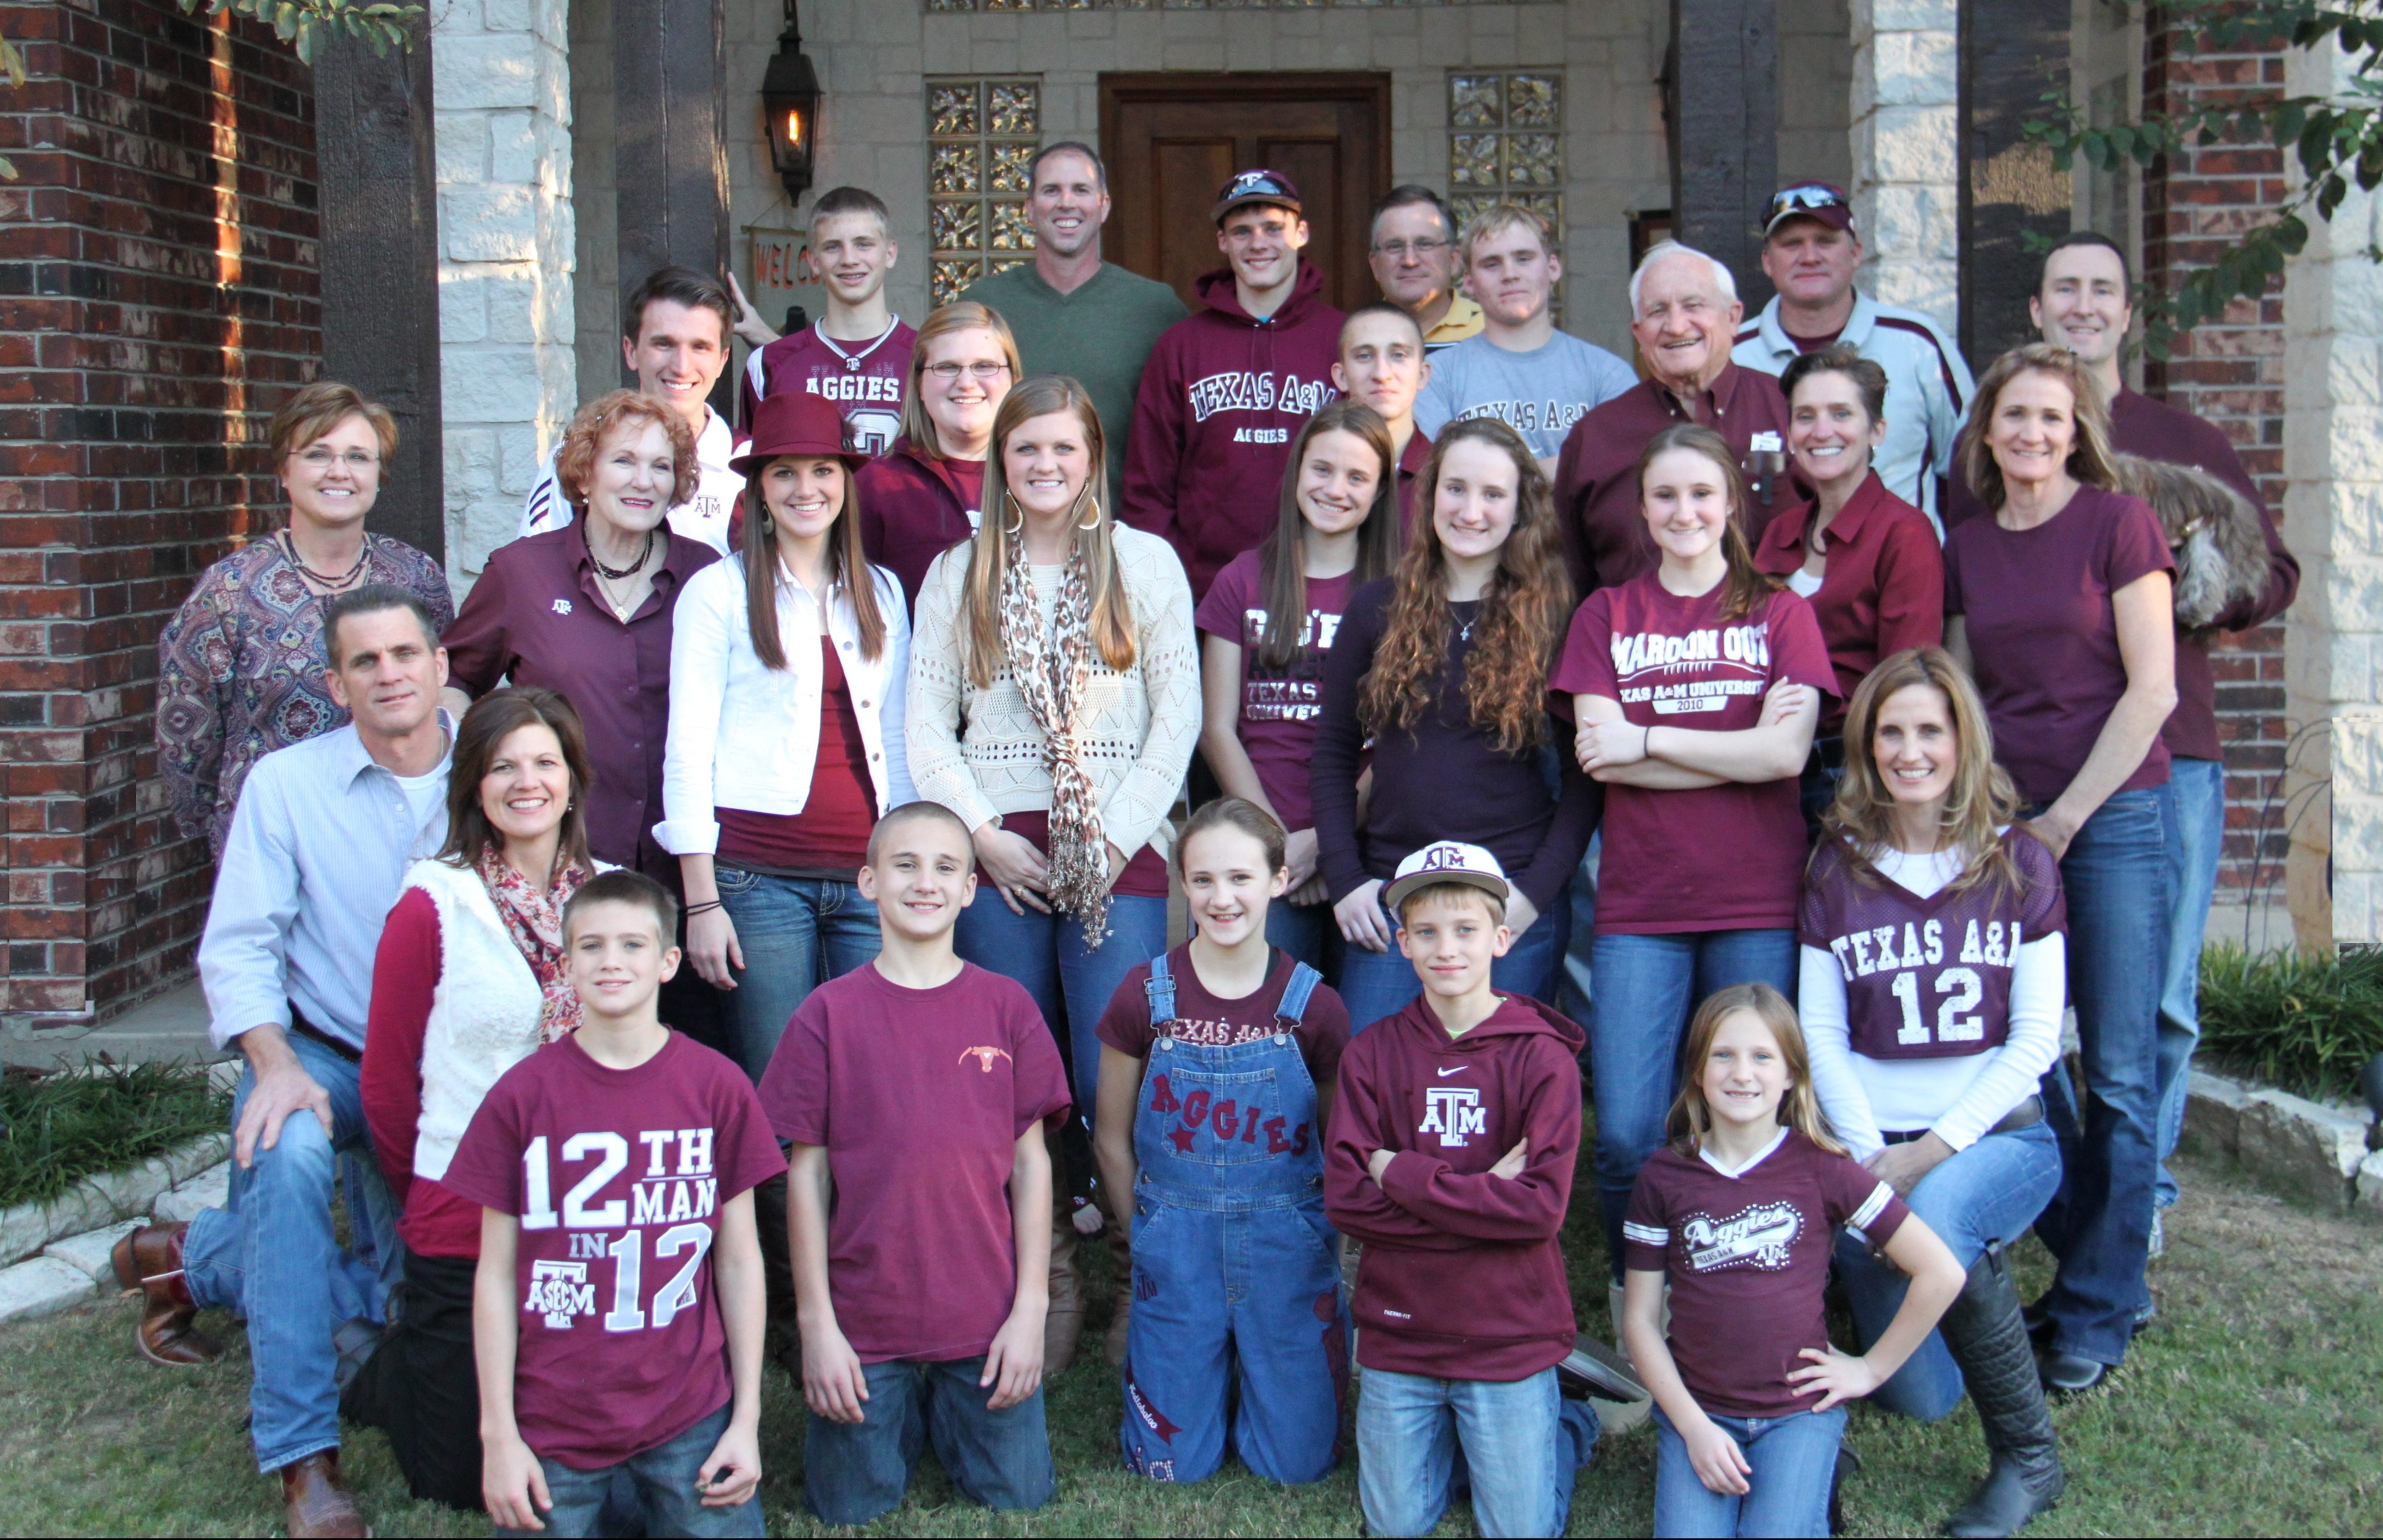 Sarah Hlavinka McConnell ‘86 and her large Aggie family, all wearing maroon.